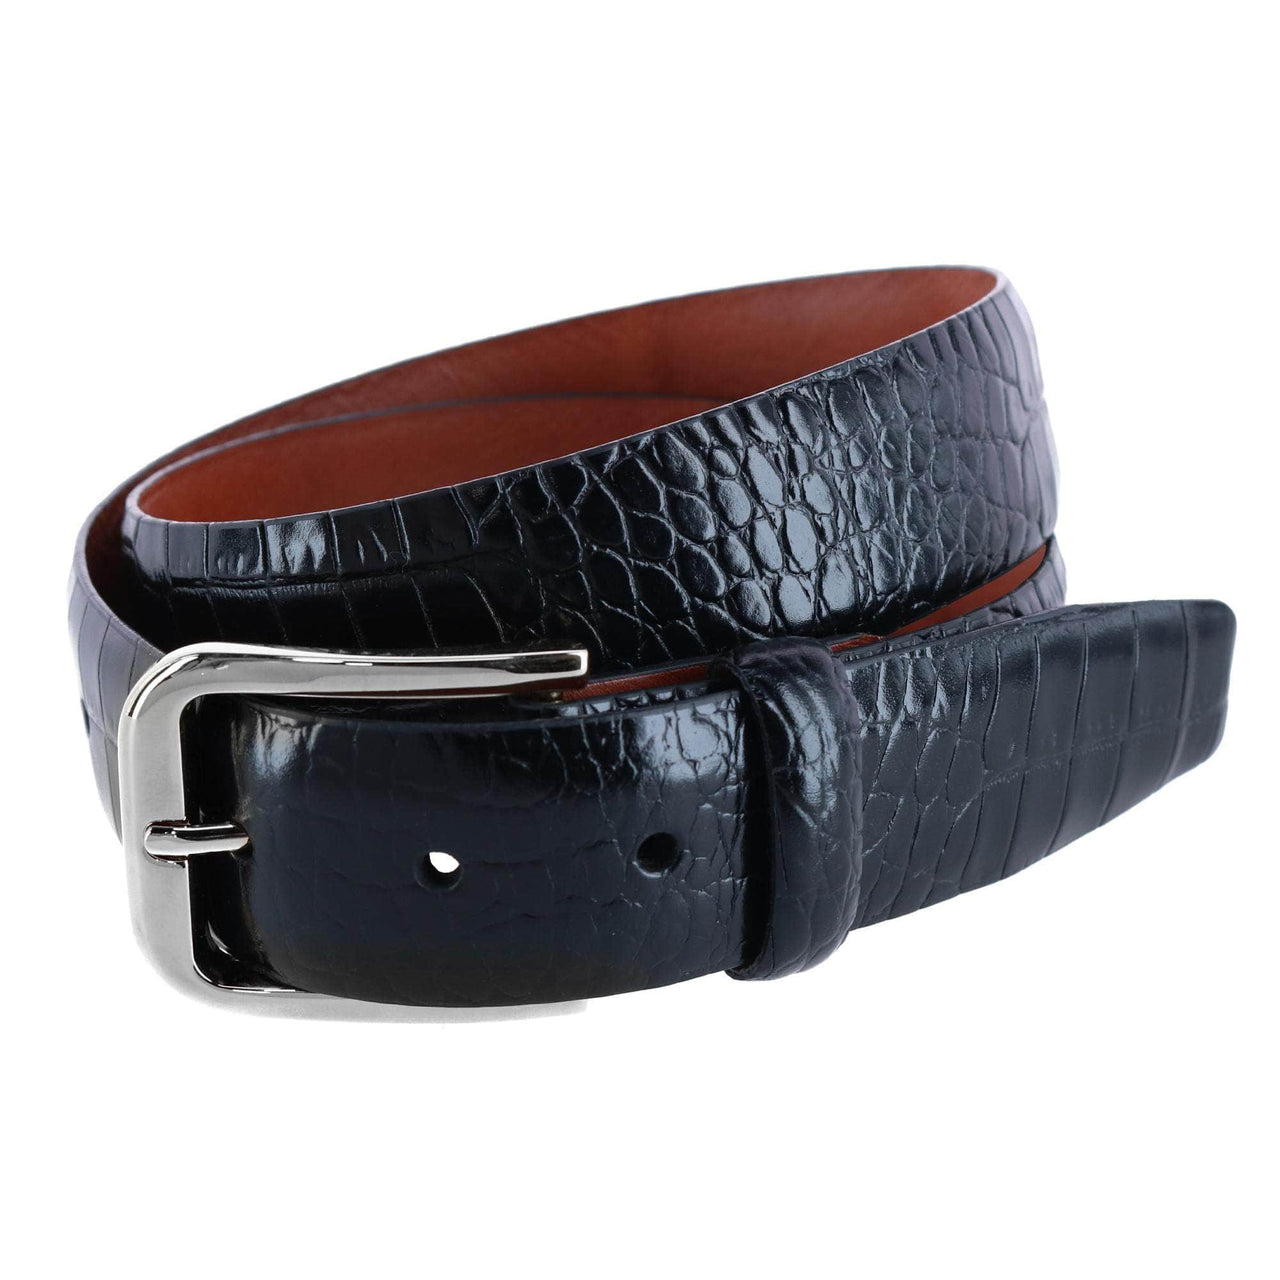 35MM Pebble Grain Leather Belt with Gold Buckle by Trafalgar Men's  Accessories